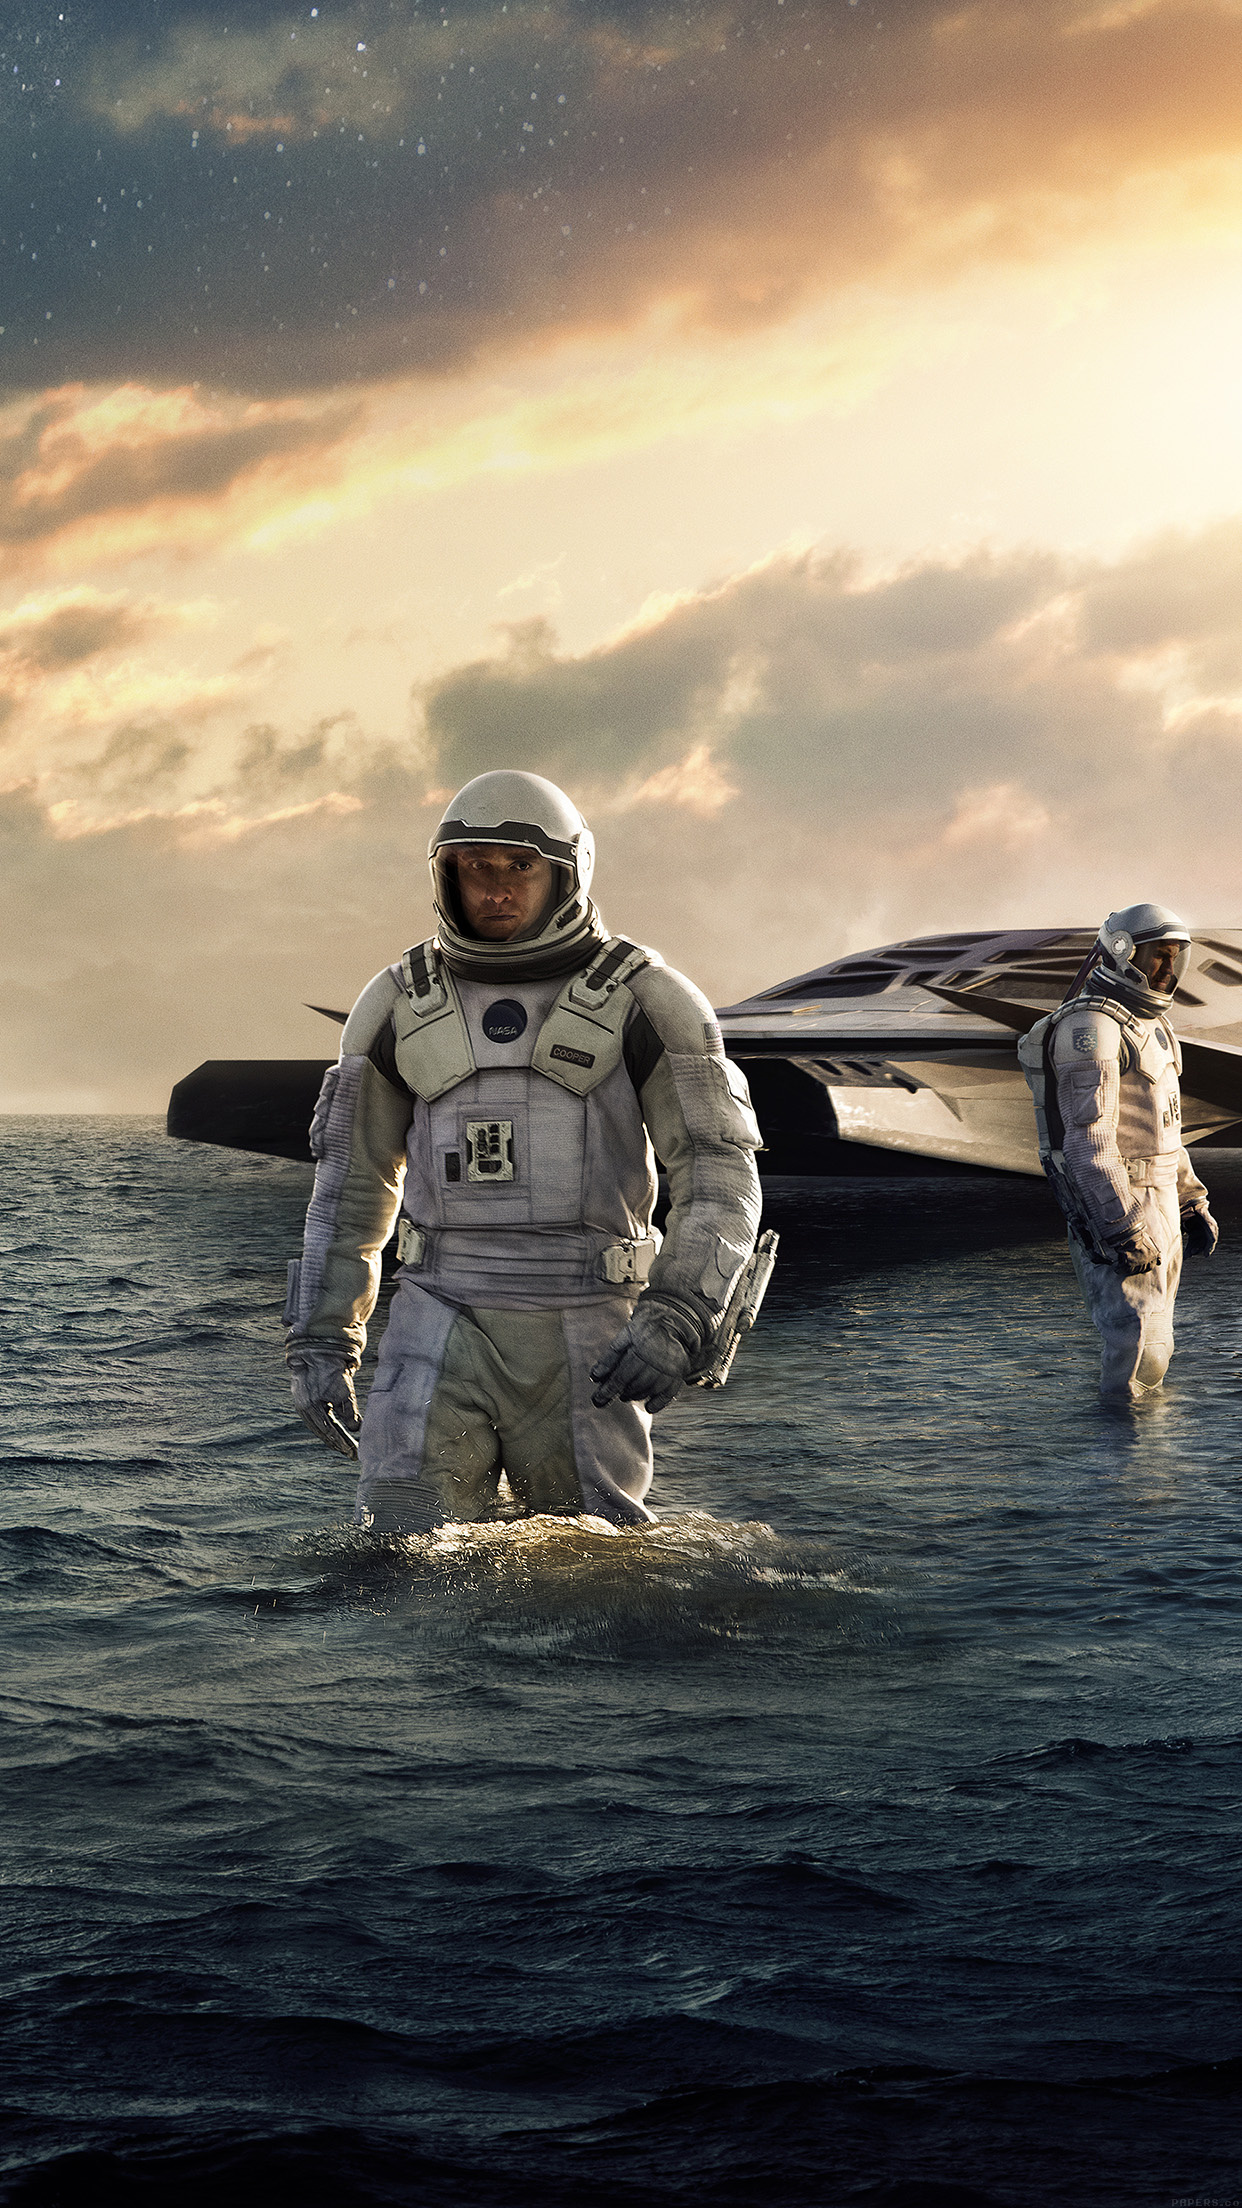 Interstellar: A team of astronauts embarking on a dangerous mission through a wormhole. 1250x2210 HD Wallpaper.